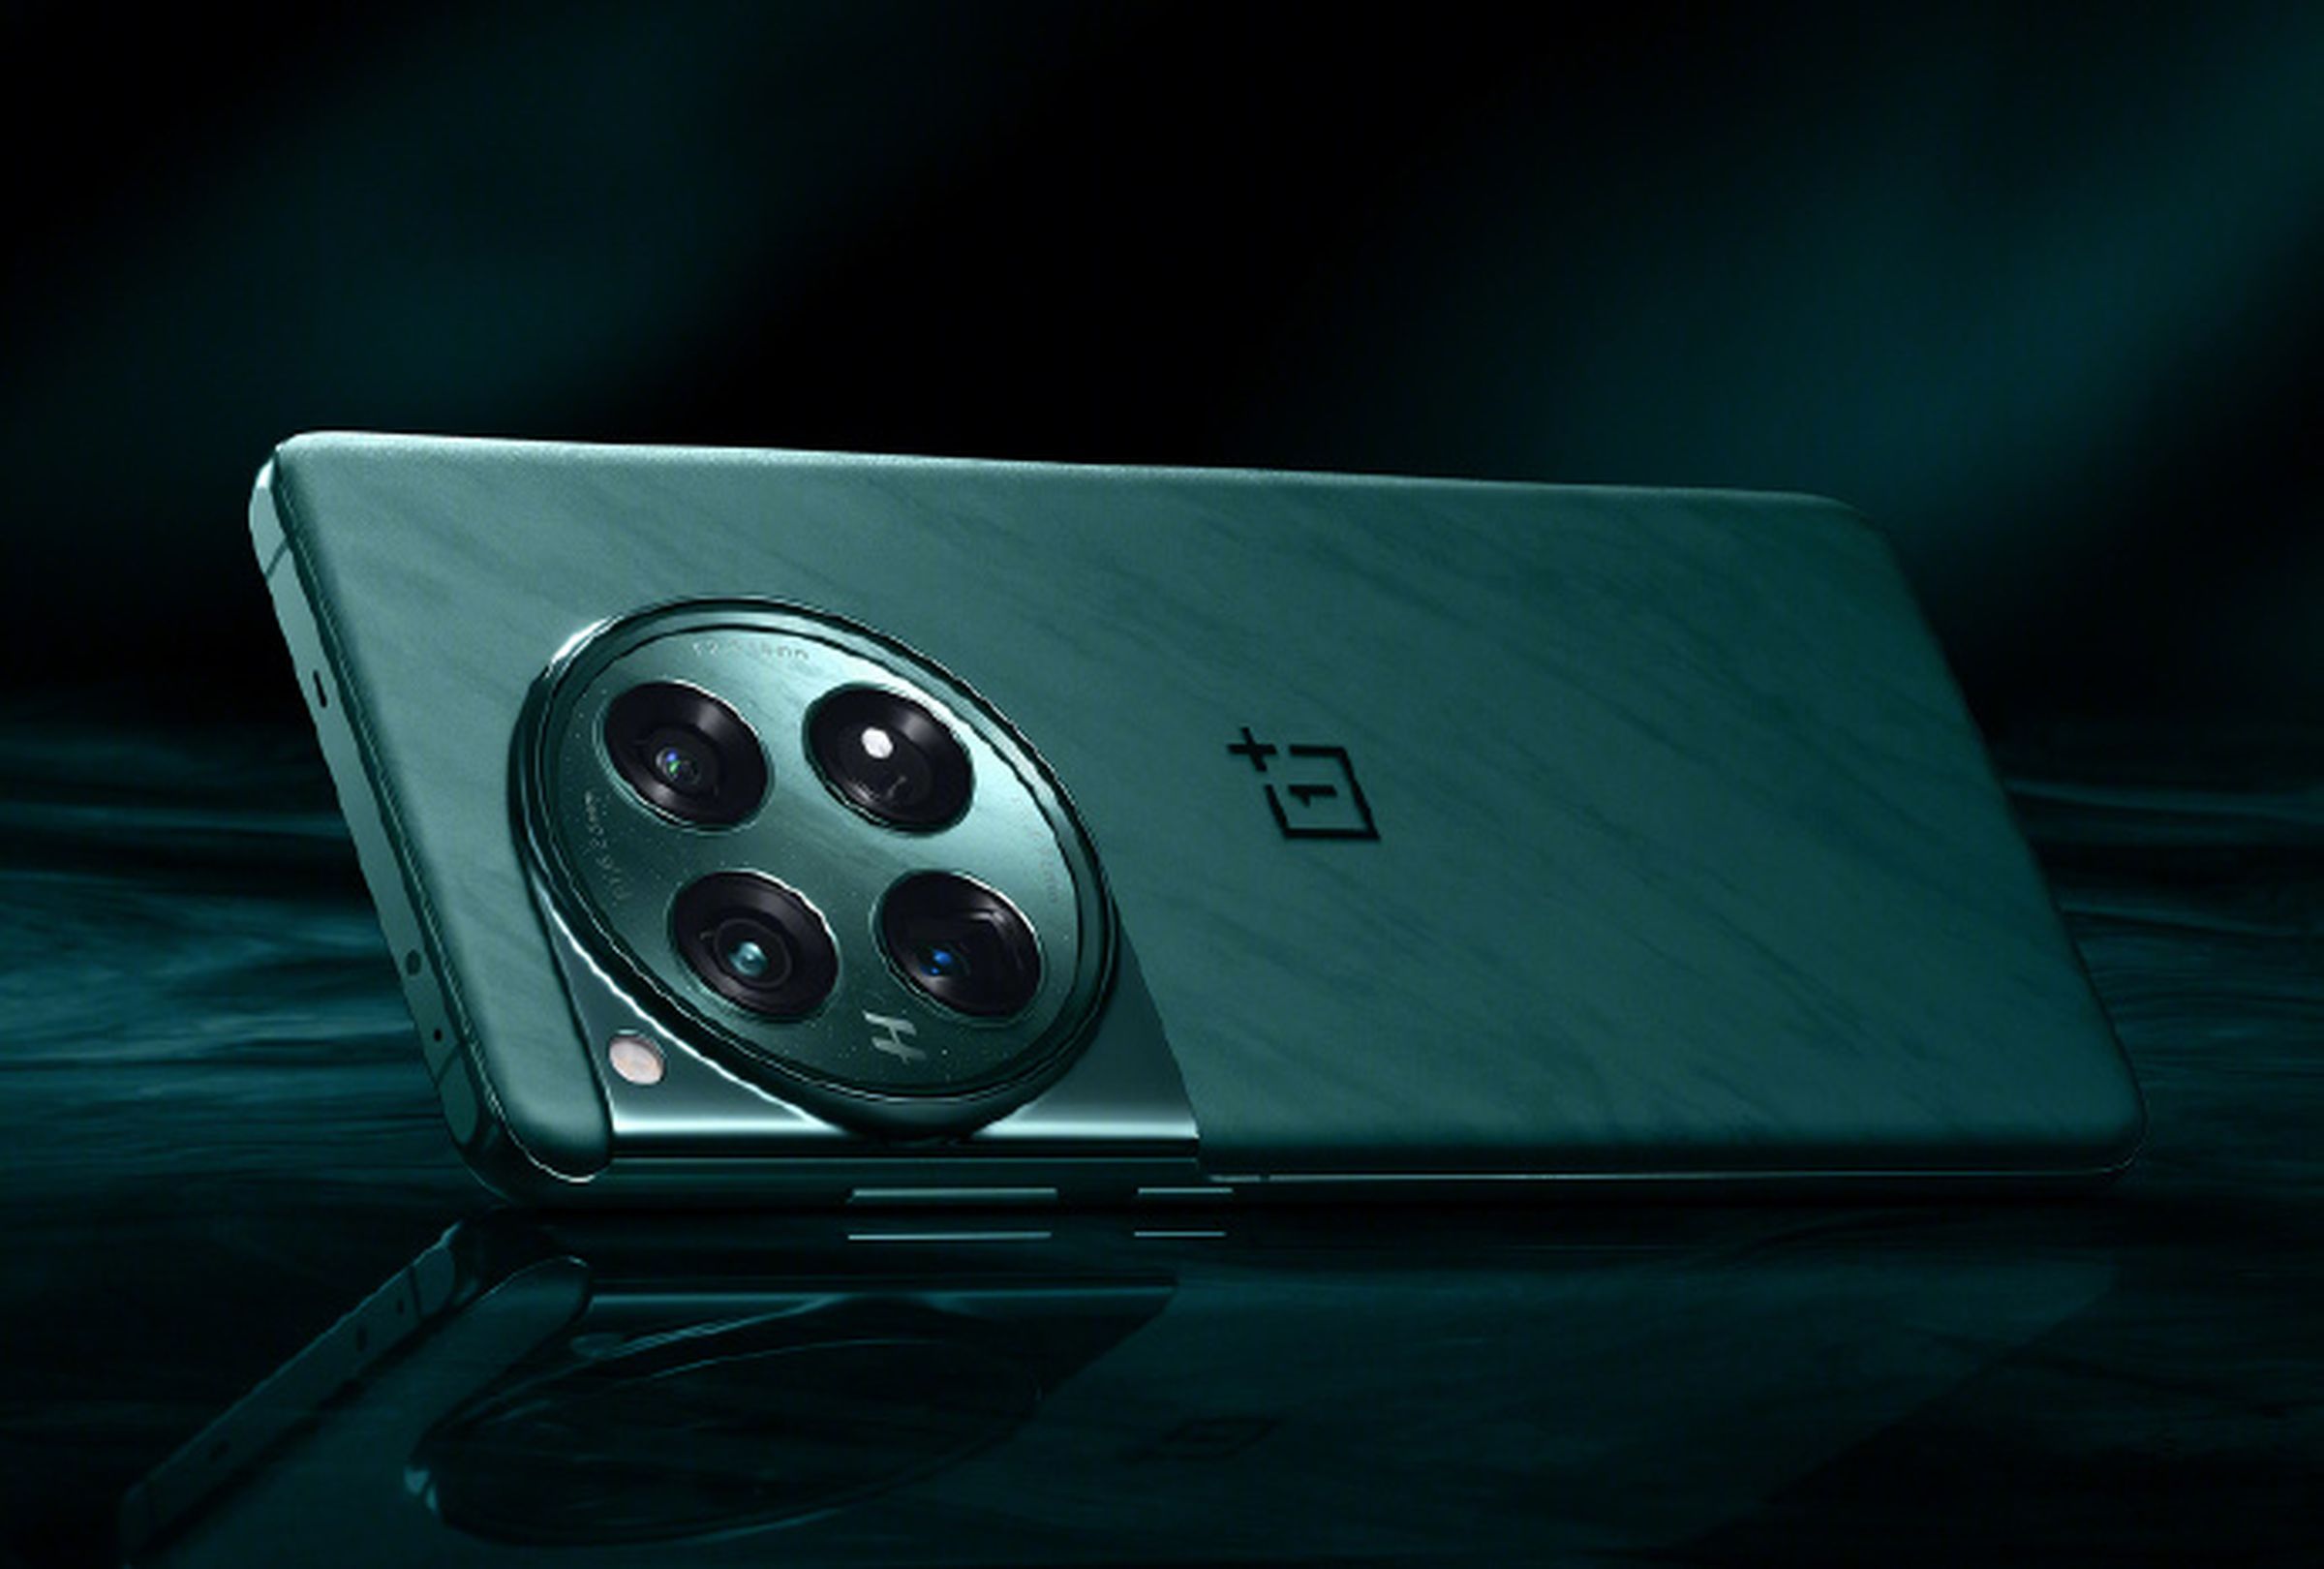 The OnePlus 12 mobile phone in green.